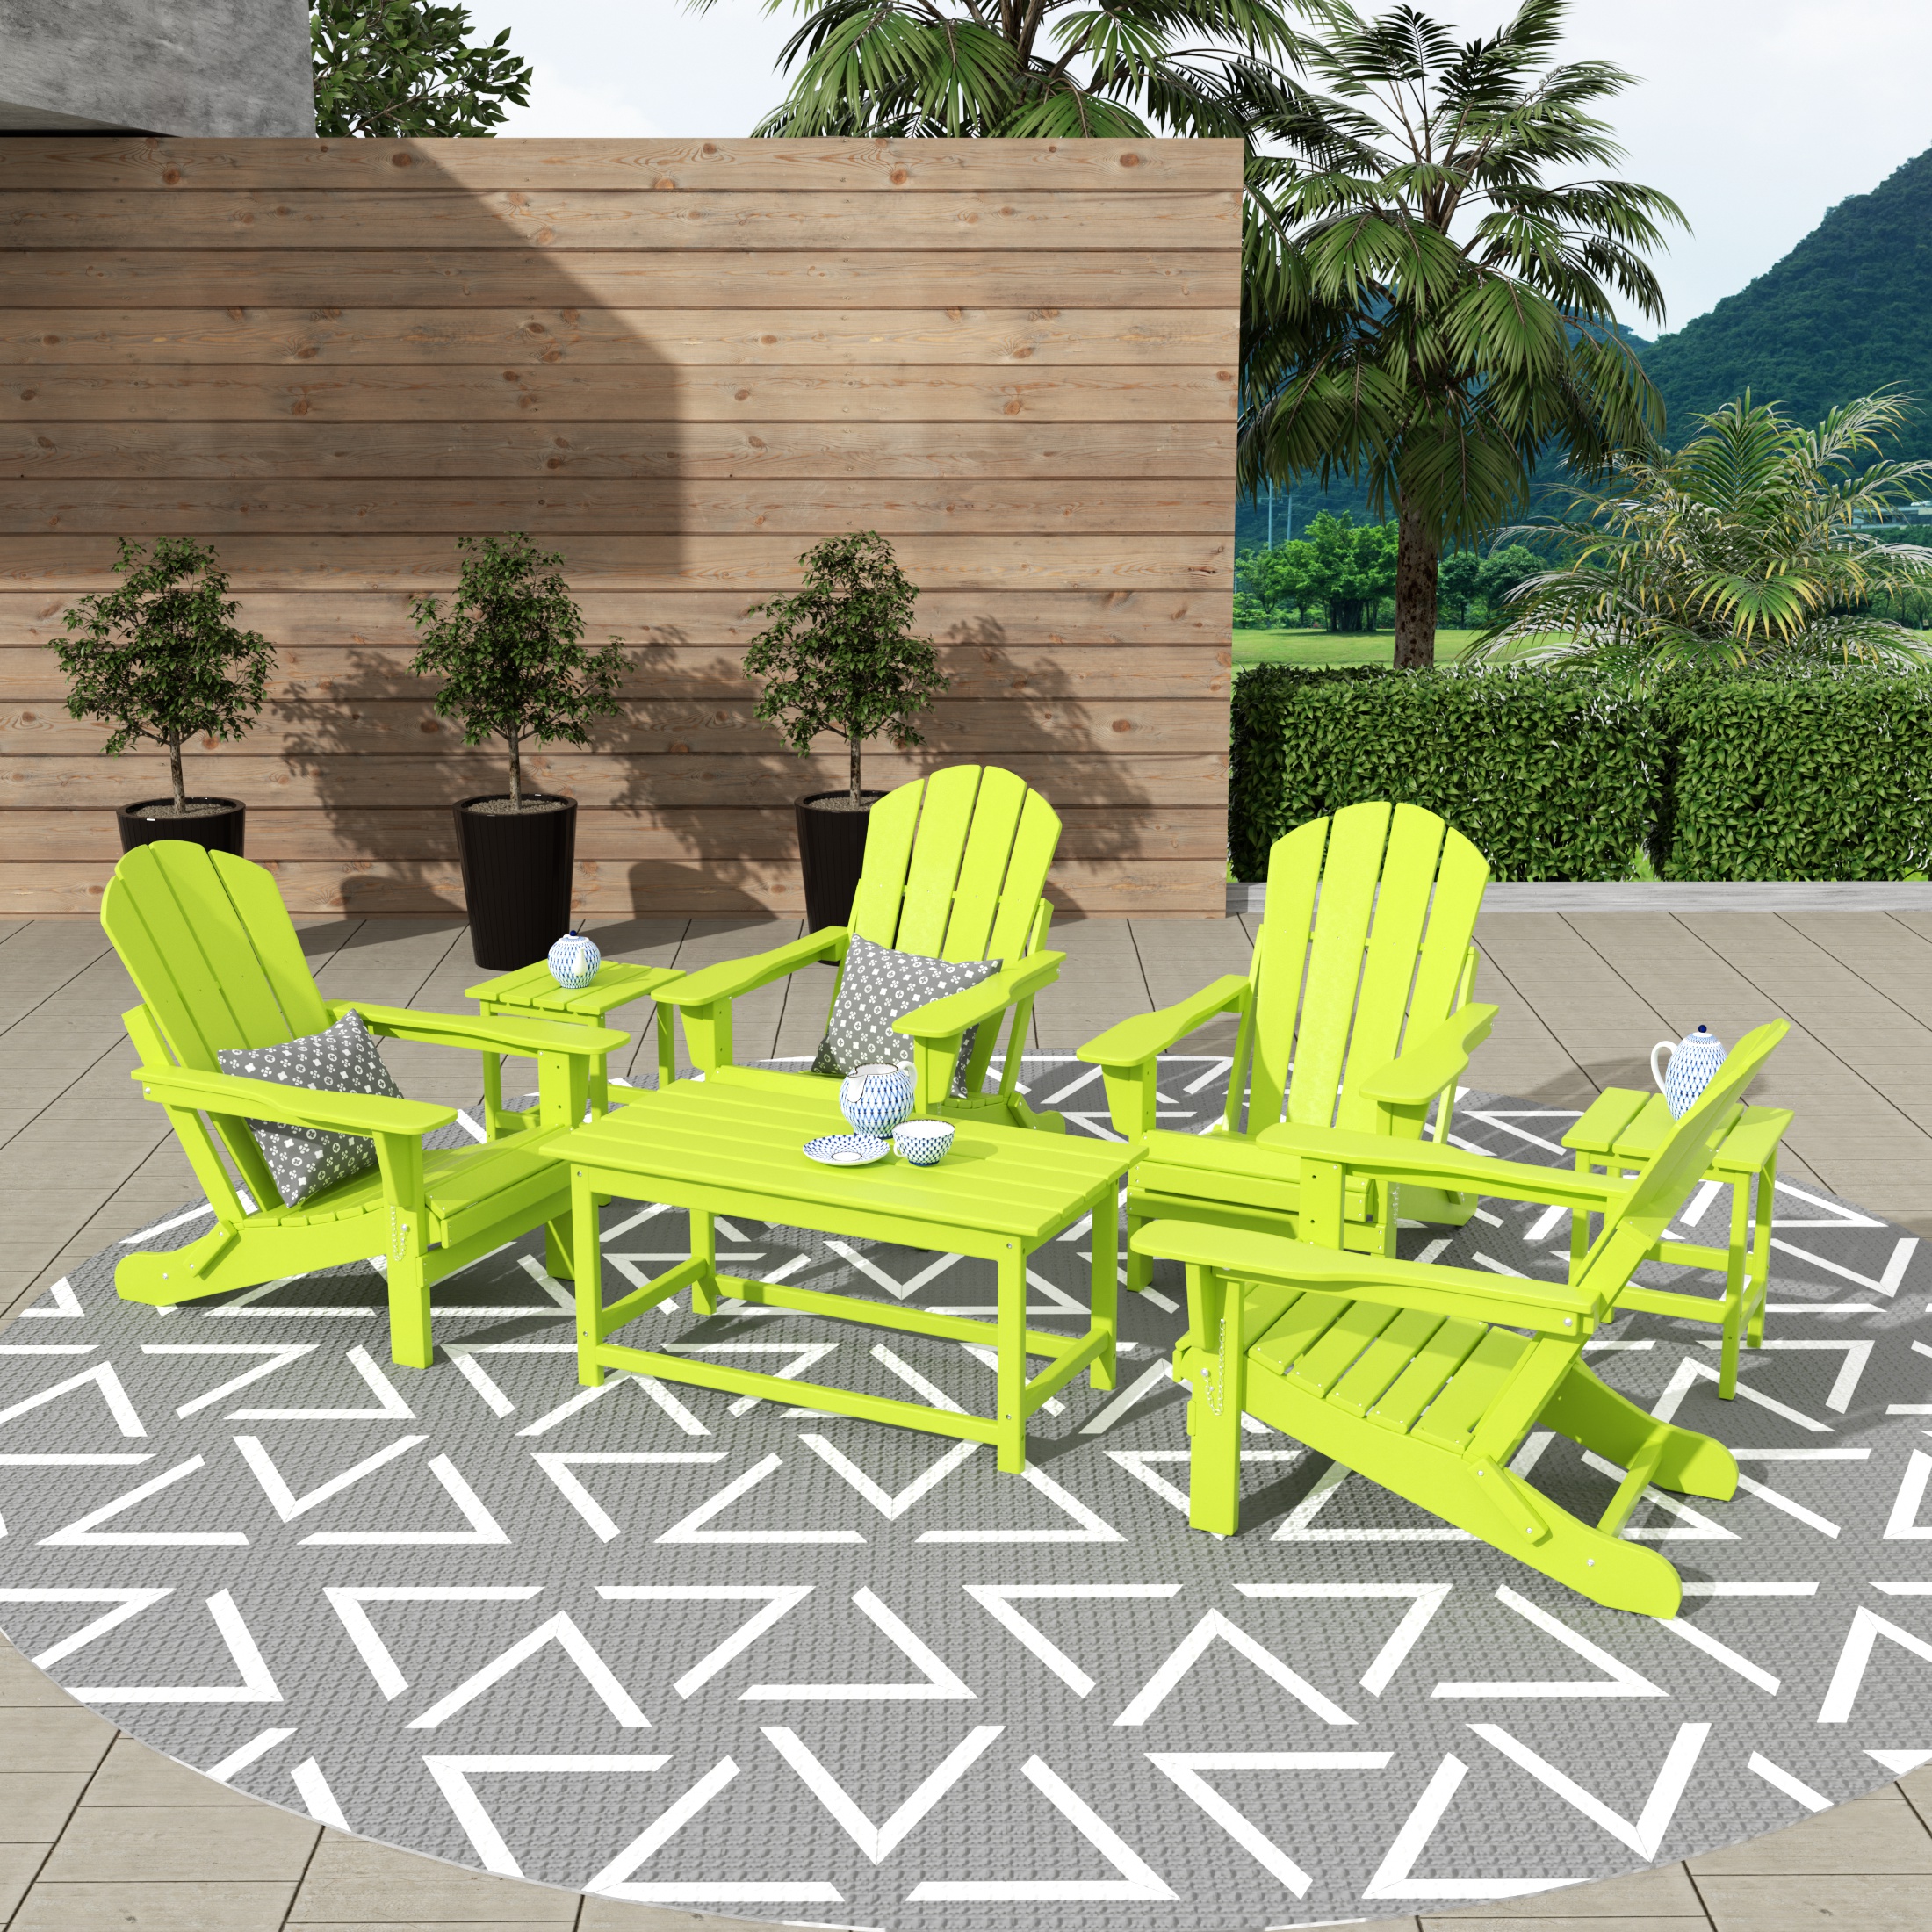 WestinTrends Malibu 7-Pieces Outdoor Patio Furniture Set, All Weather Outdoor Seating Plastic Adirondack Chair Set of 4, Coffee Table and 2 Side Table, Lime - image 2 of 7